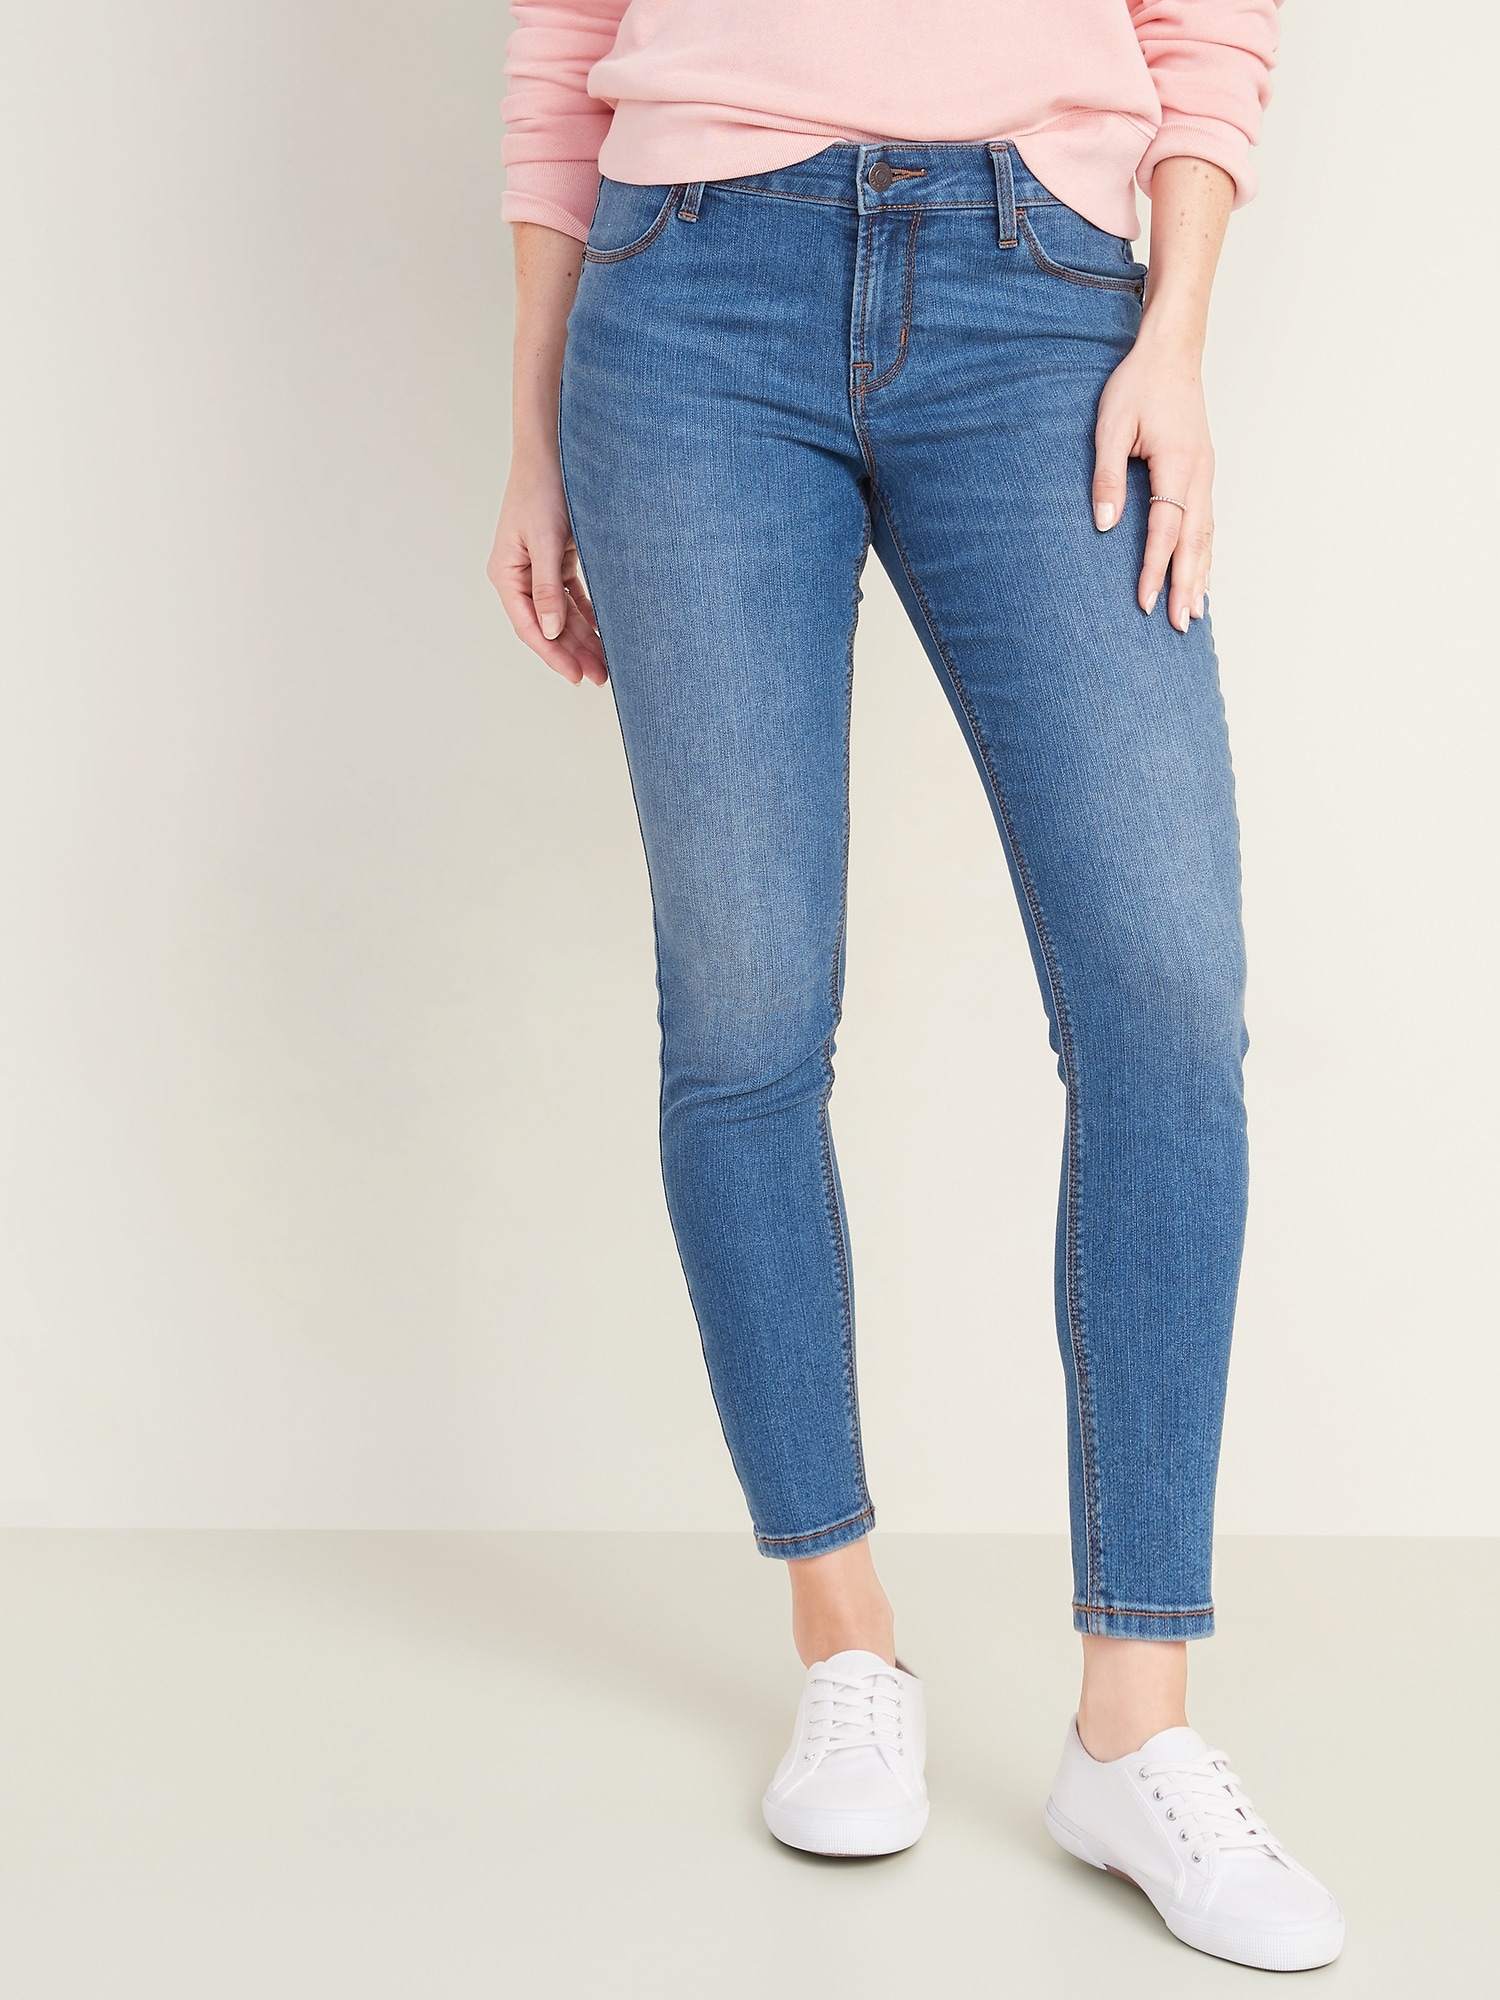 jeans skinny at ankle